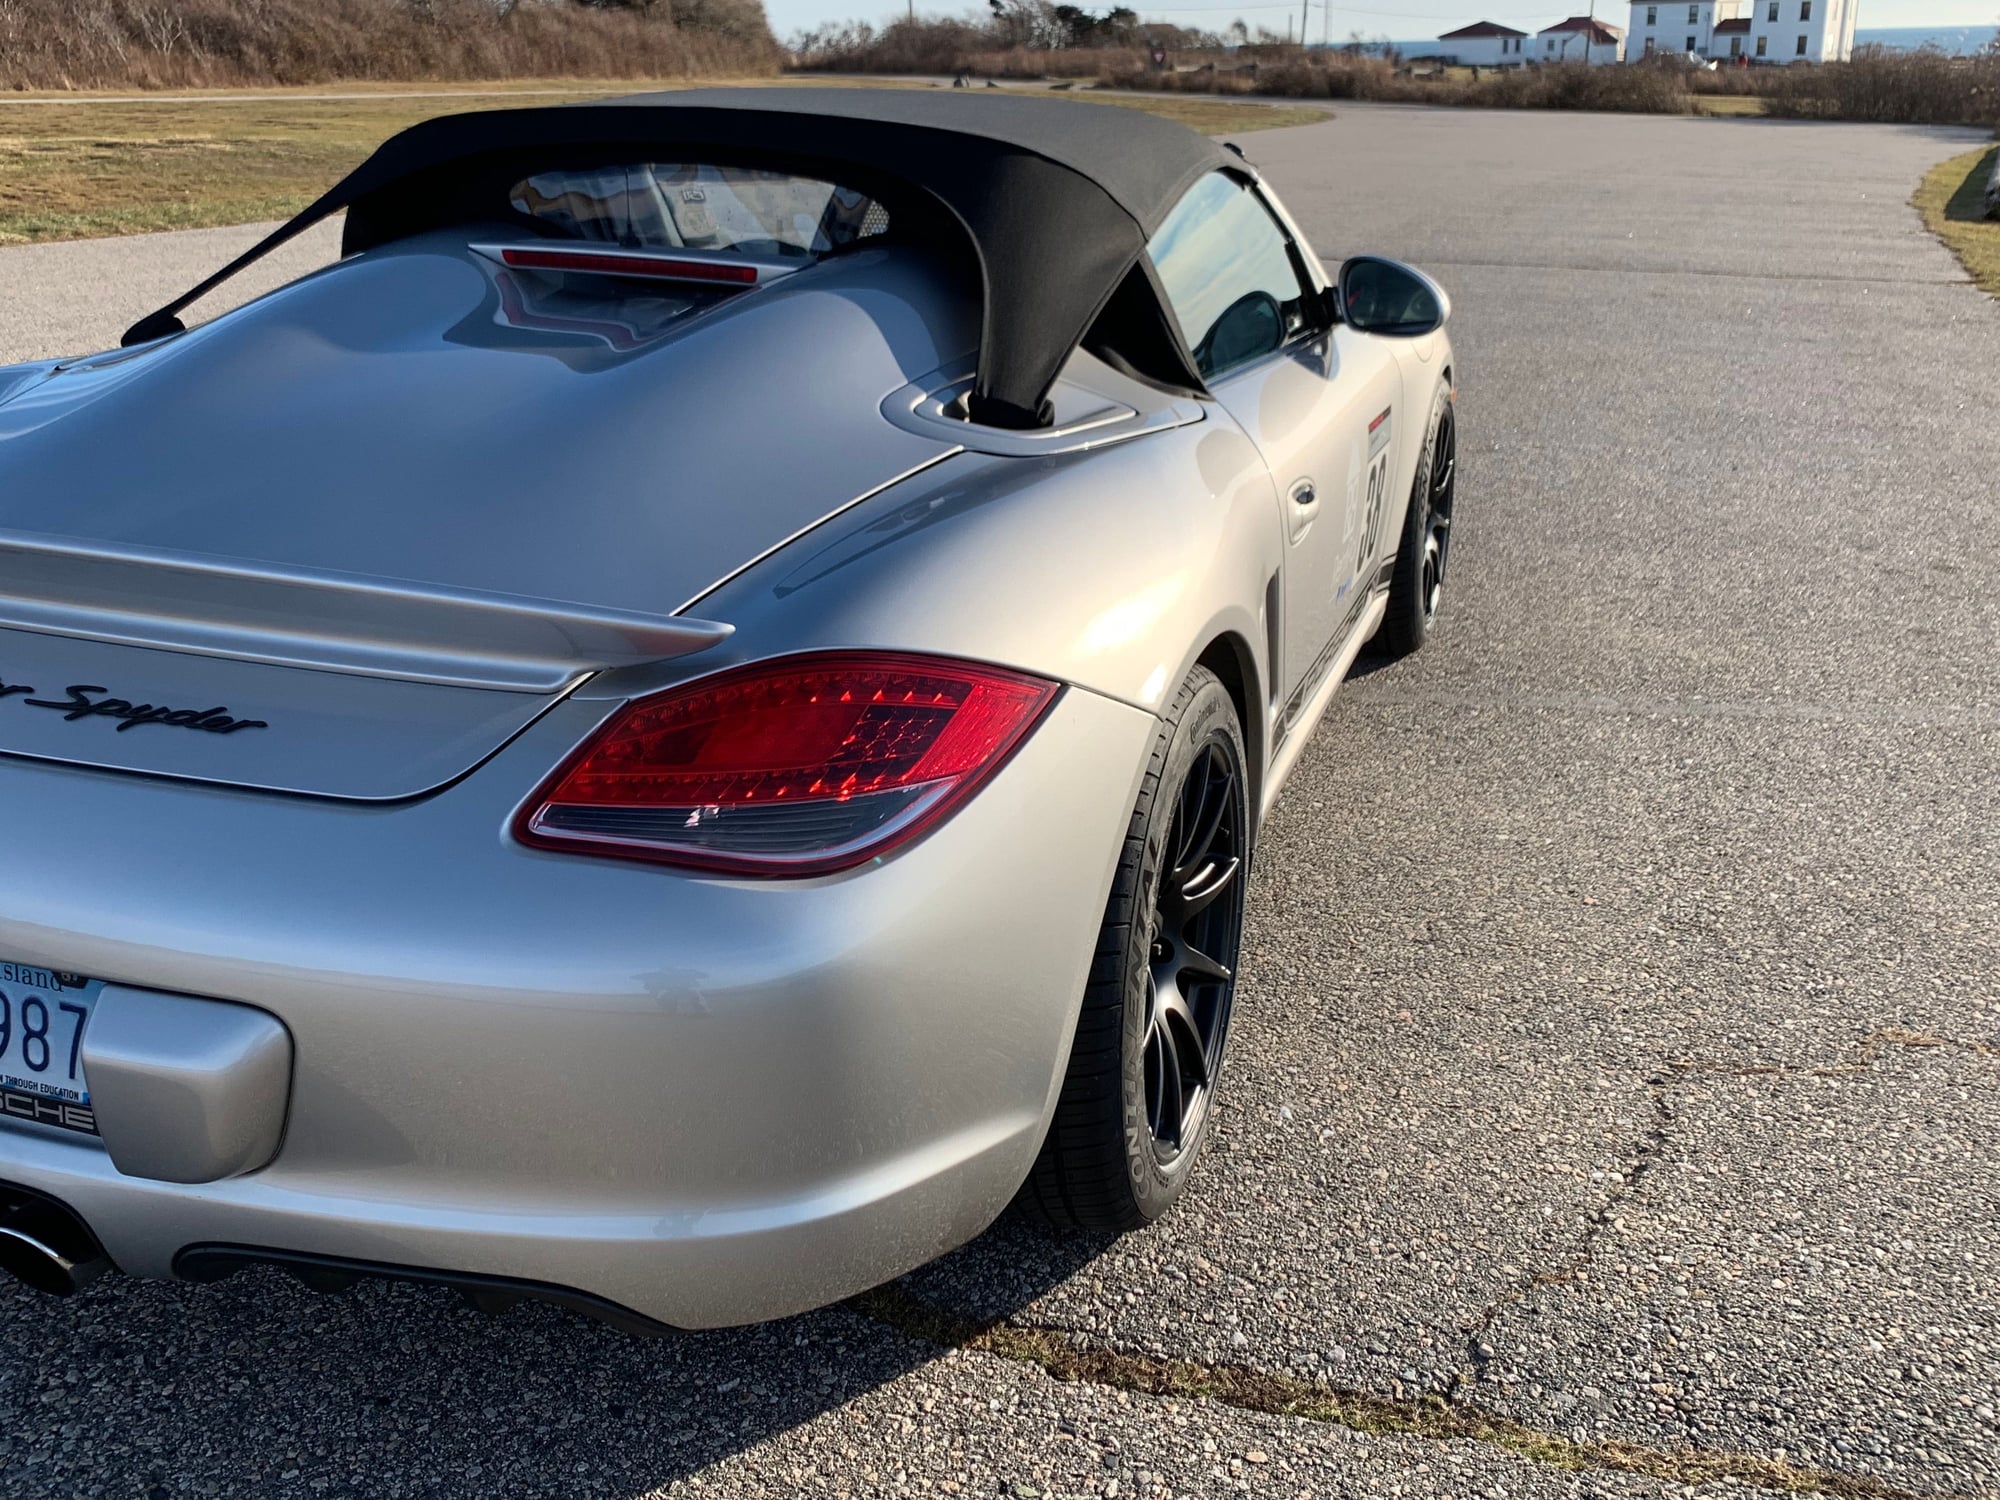 2011 Porsche Boxster - 2011 Boxster Spyder by original owner - Used - VIN WP0CB2A84BS745588 - 51,000 Miles - 6 cyl - 2WD - Automatic - Convertible - Silver - Narragansett, RI 02882, United States